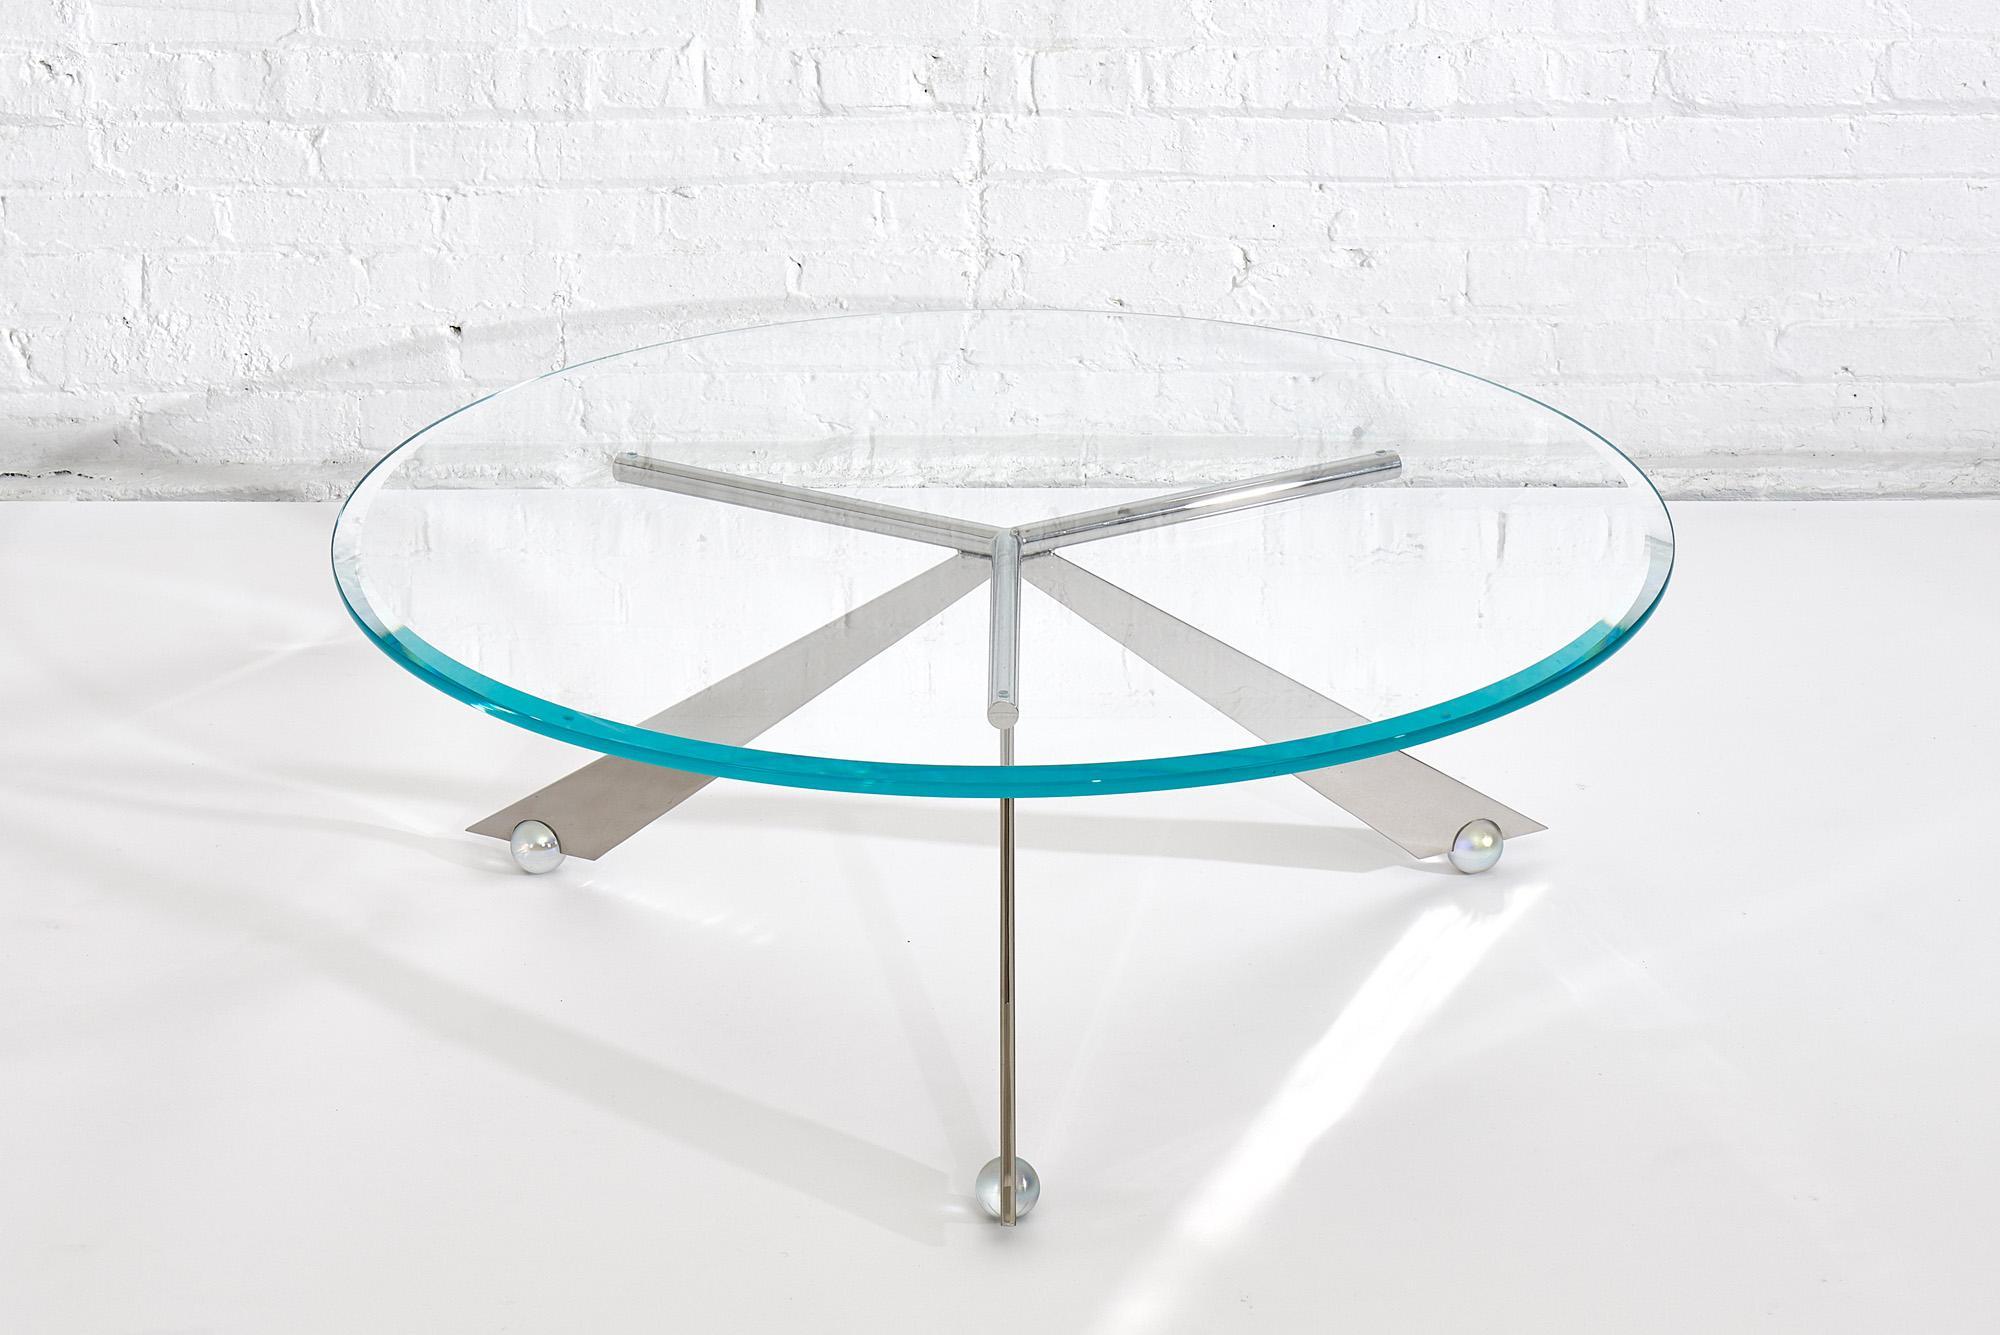 Brueton Cristal stainless steel and glass coffee table by J. Wade Beam. Stainless steel base rest on glass ball feet with iridescent finish. Glass has a faceted edge.